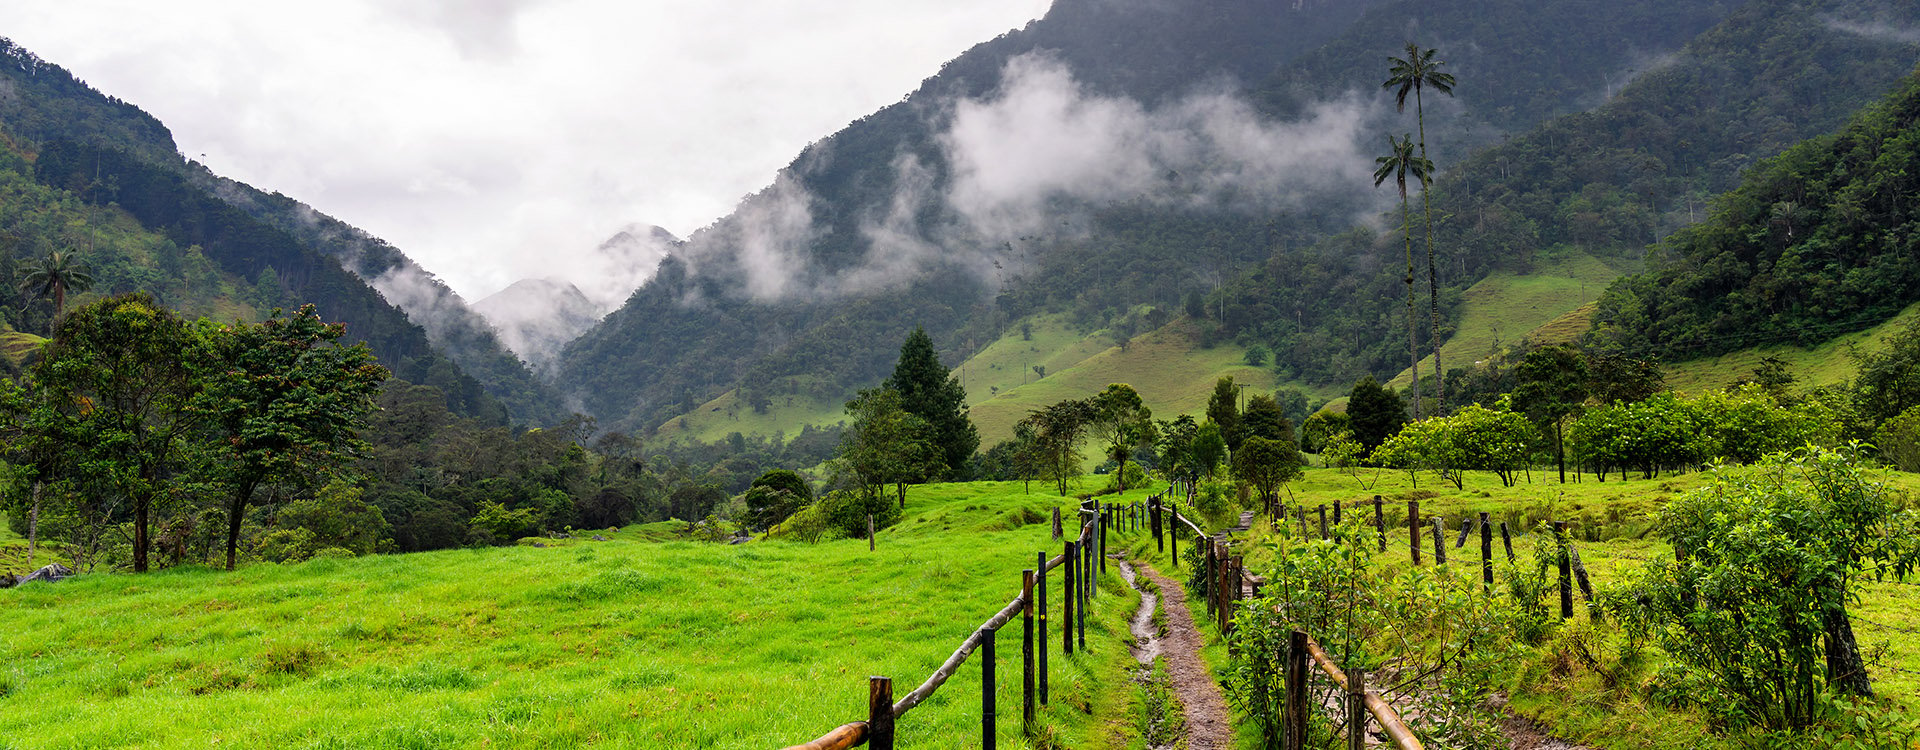 A view from the beginning of the hike towards Cocora Valley which is famous for its tall wax palm trees in Colombia